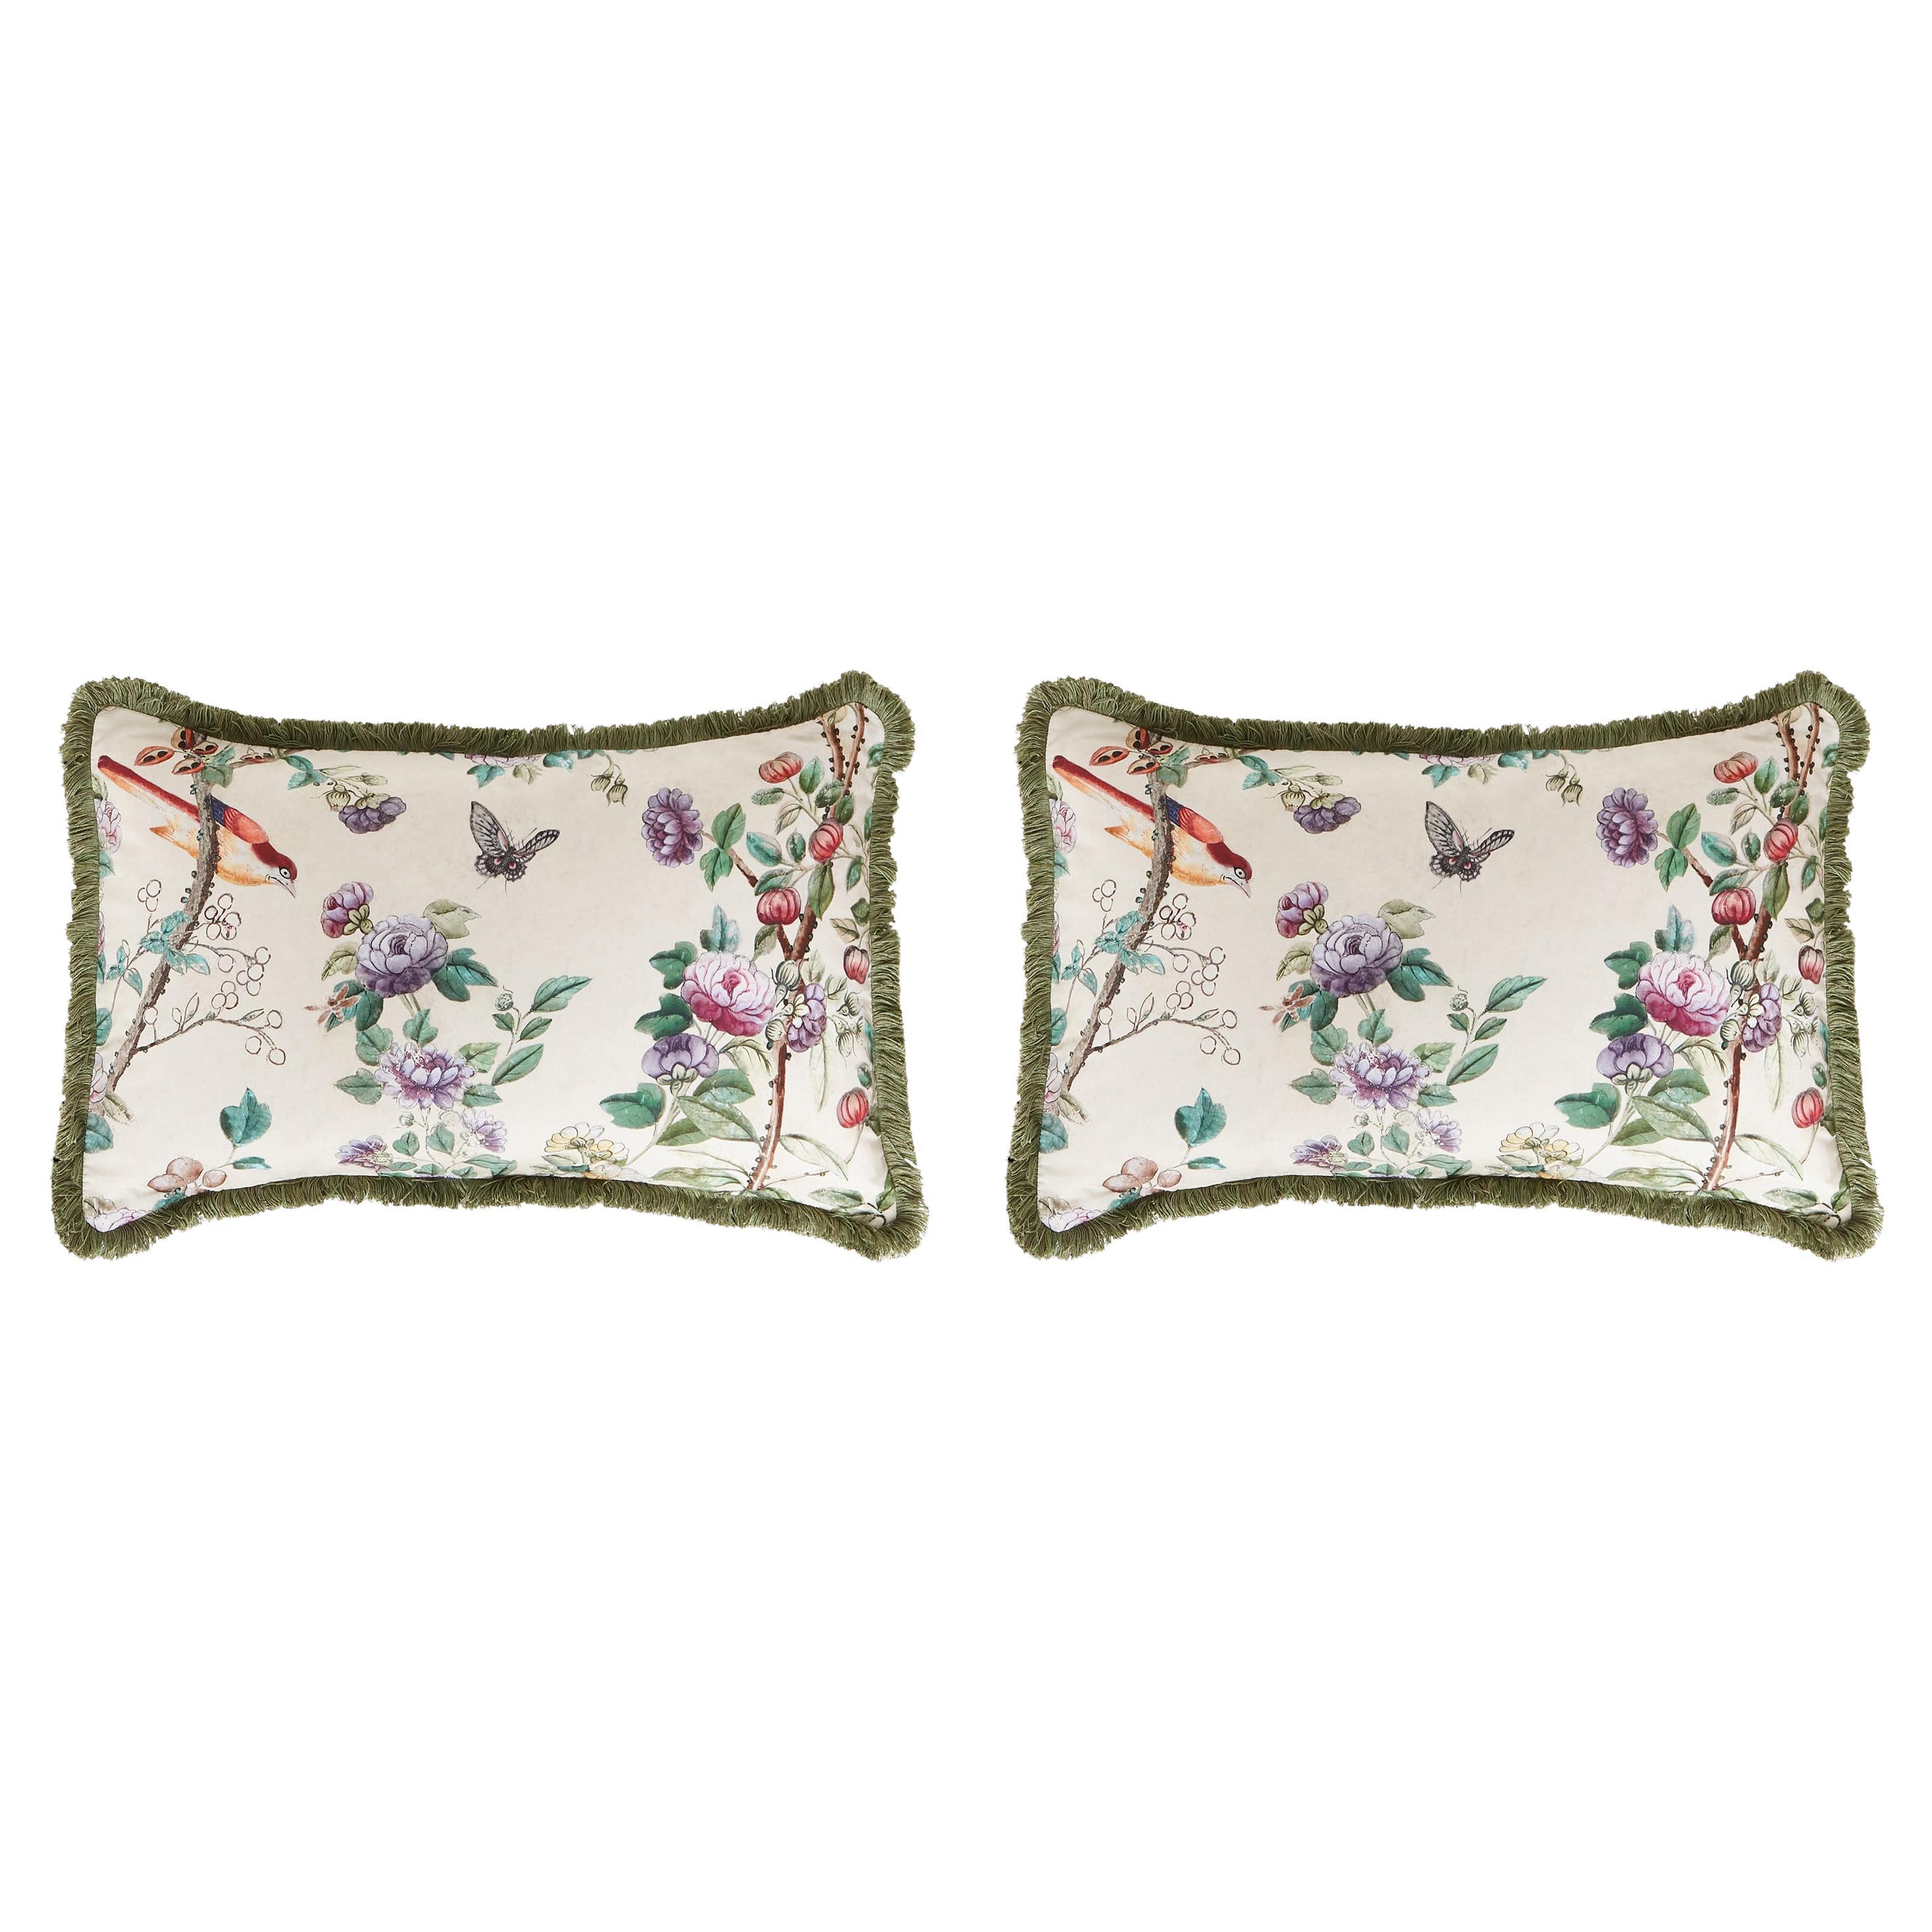 Pair of Pillow Cushions - Canton Bird Theme - Designed and Made in Paris